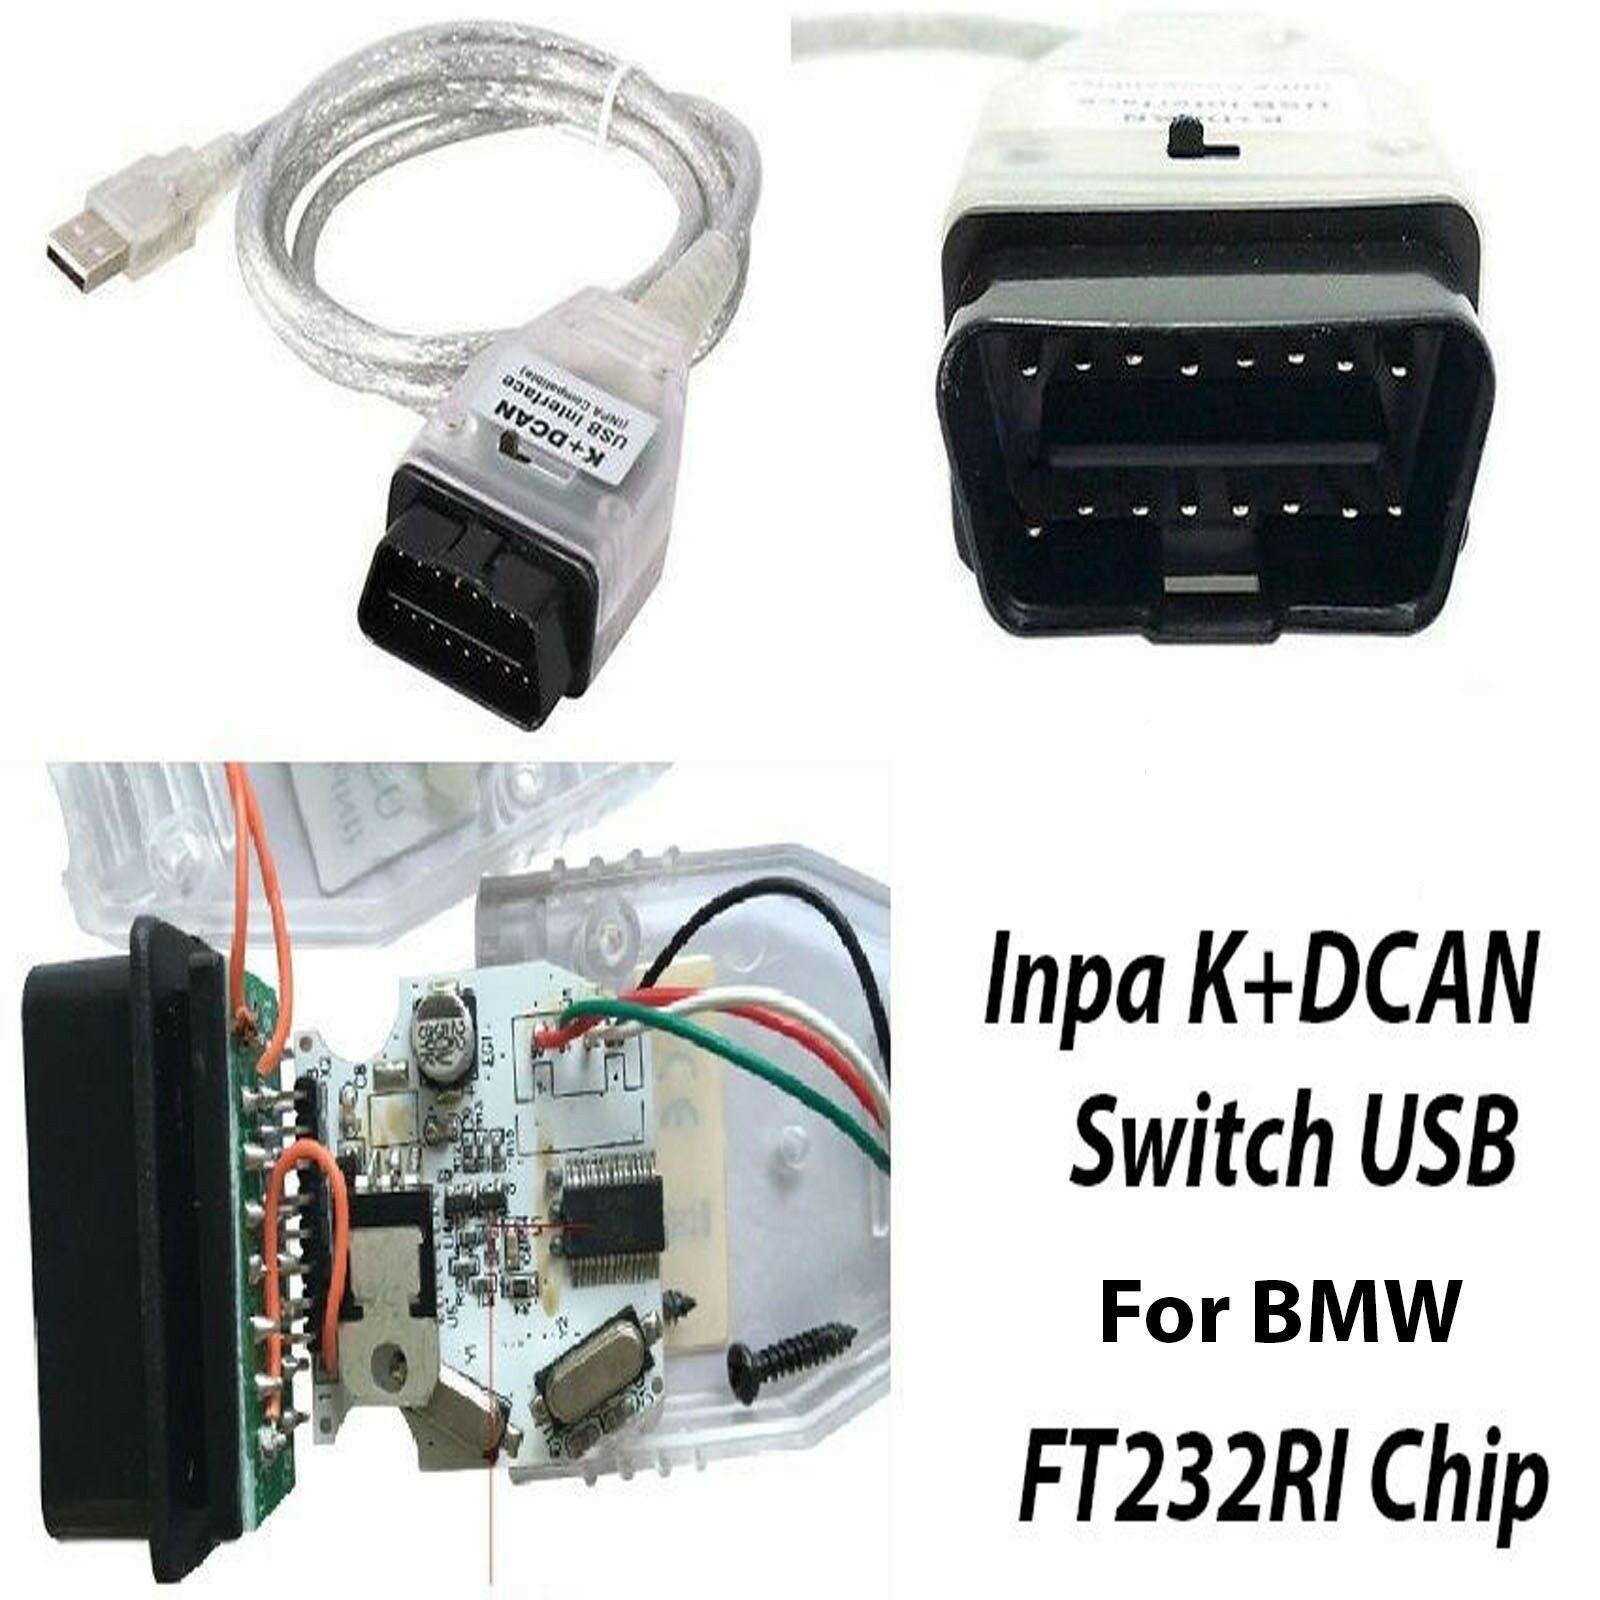 OBD2 Inpa K D CAN Diagnostic scan Tool with Switch USB Interface Cable for Bmw 2